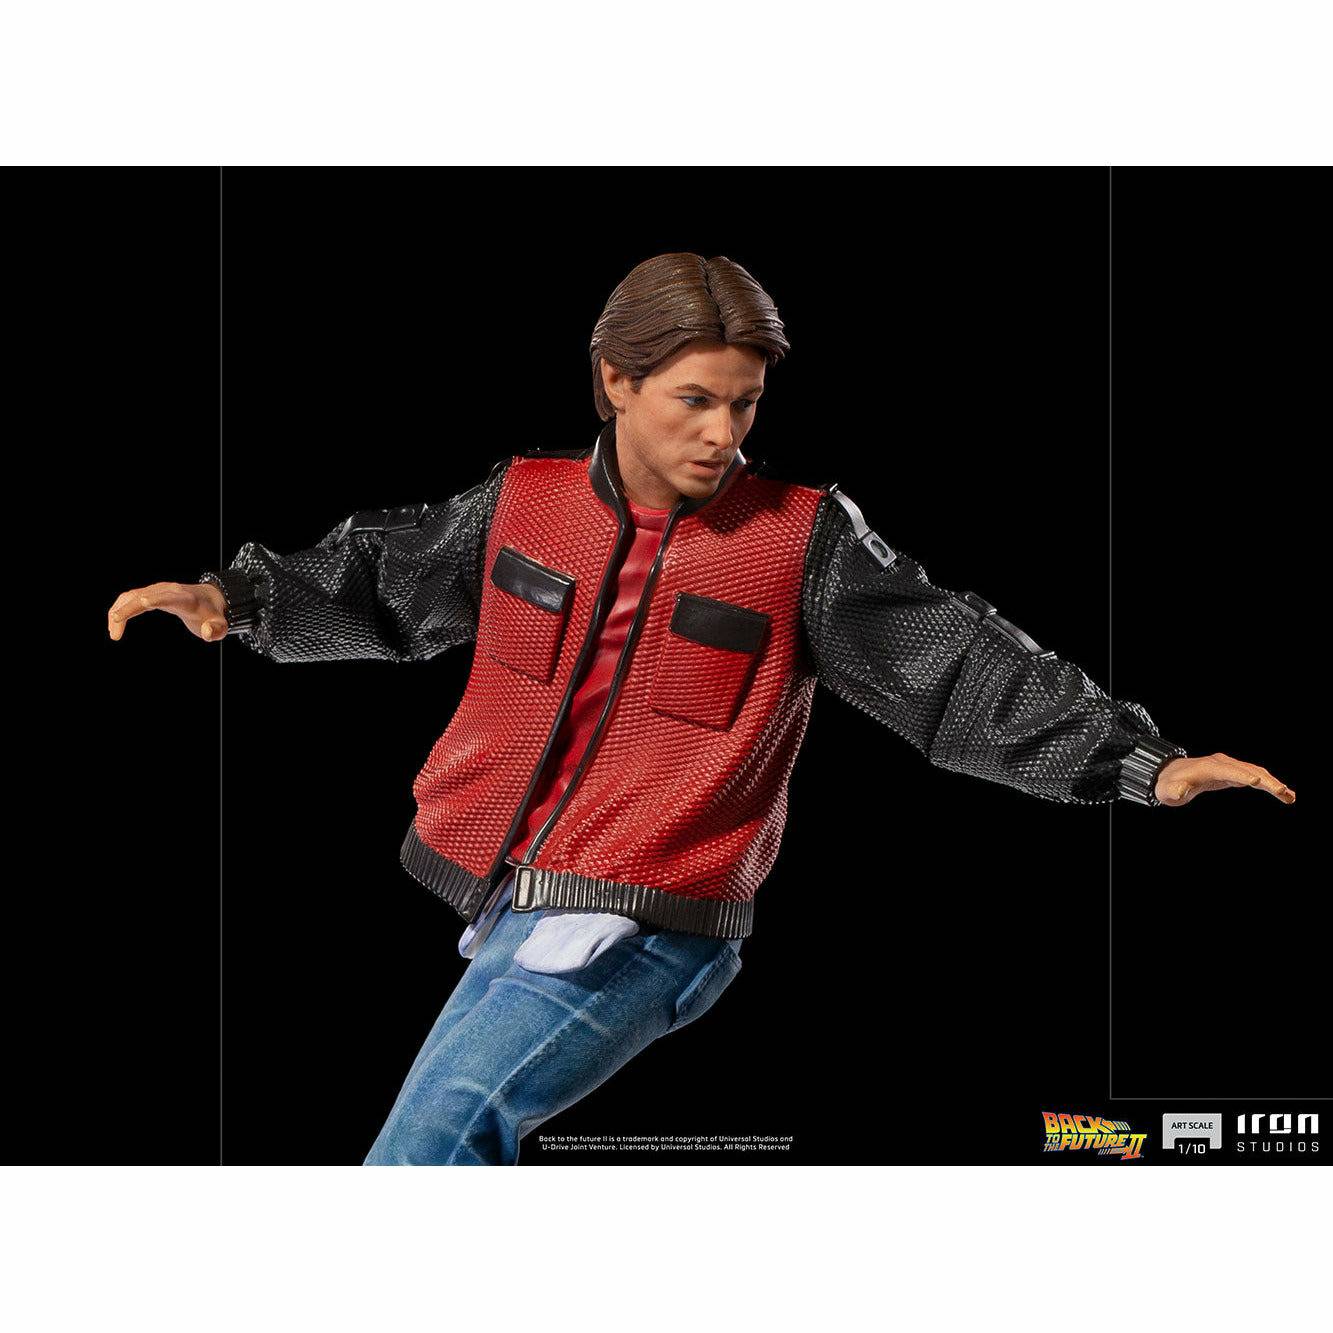 Iron Studios Back to the Future Part II Marty McFly on Hoverboard 1:10 Scale Statue Statue Iron Studios